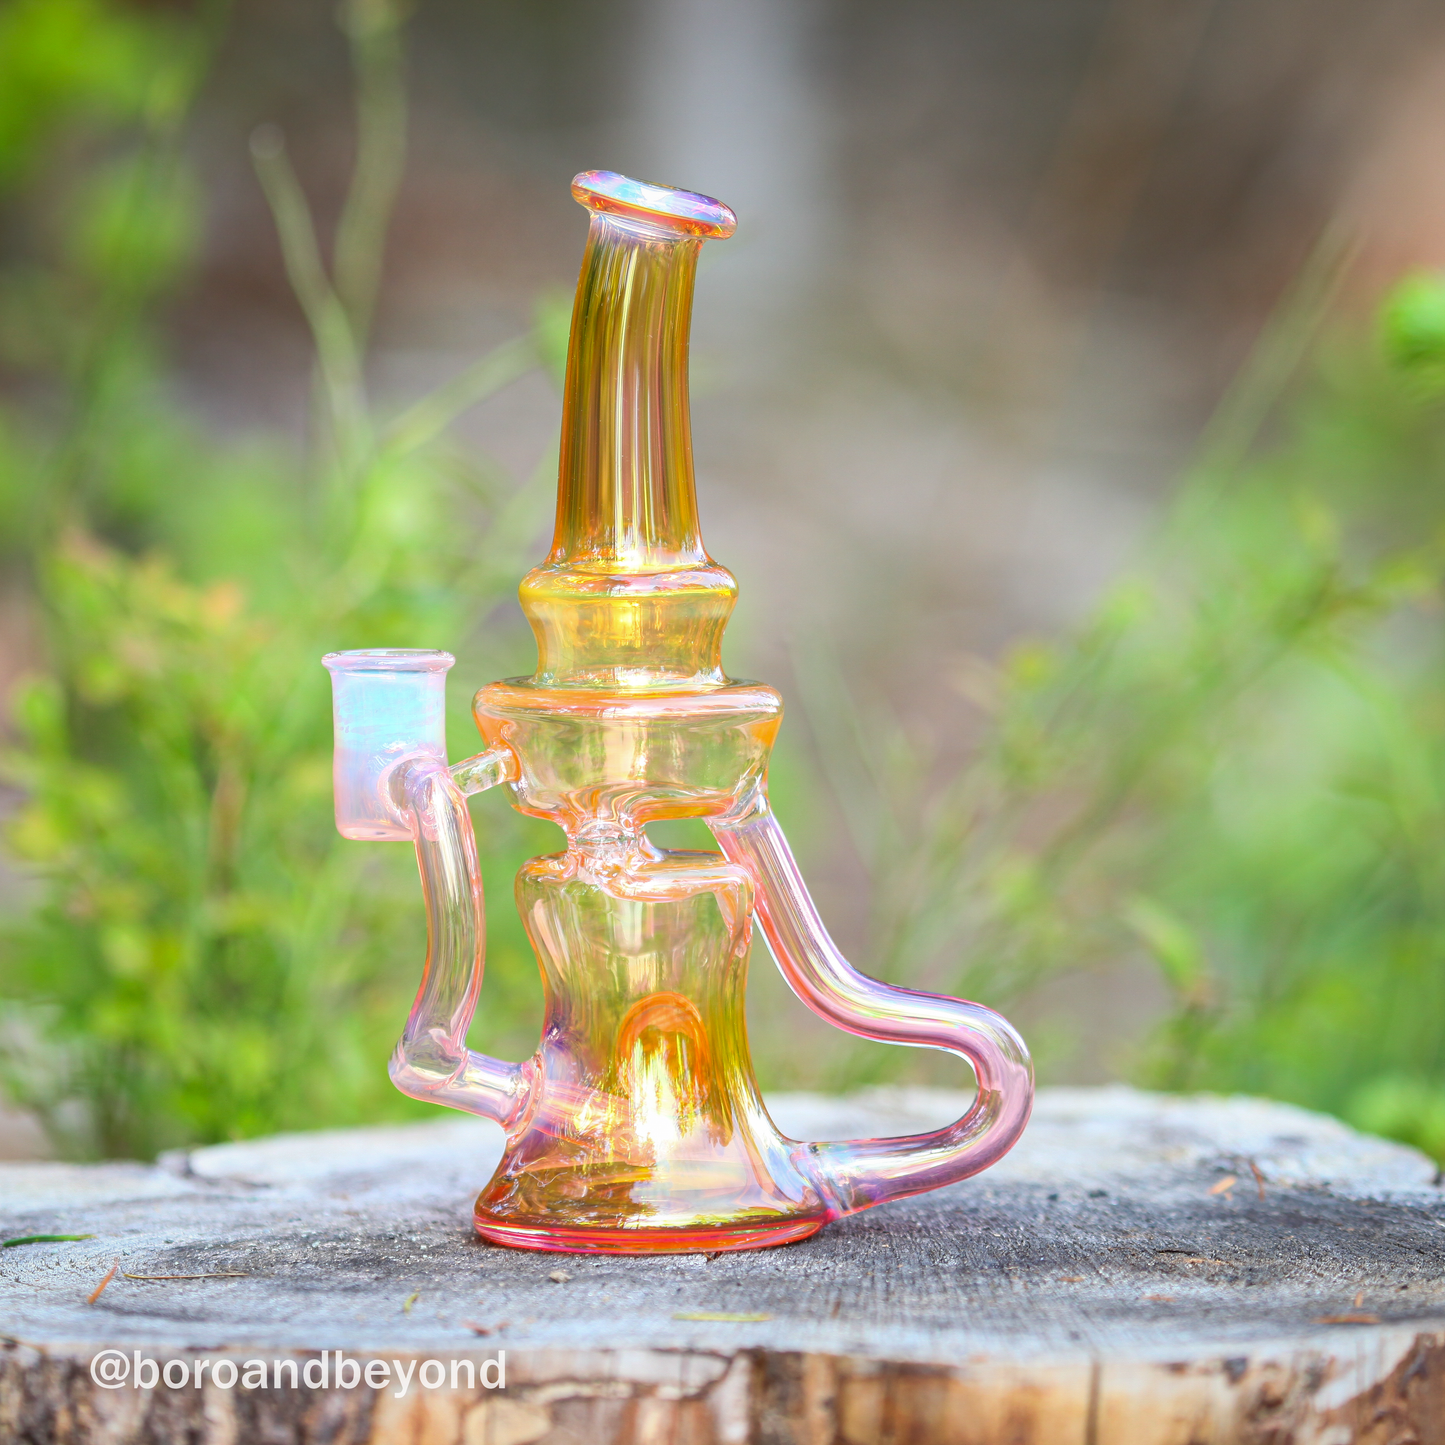 14mm Gold/Silver Pump and Dump Recycler